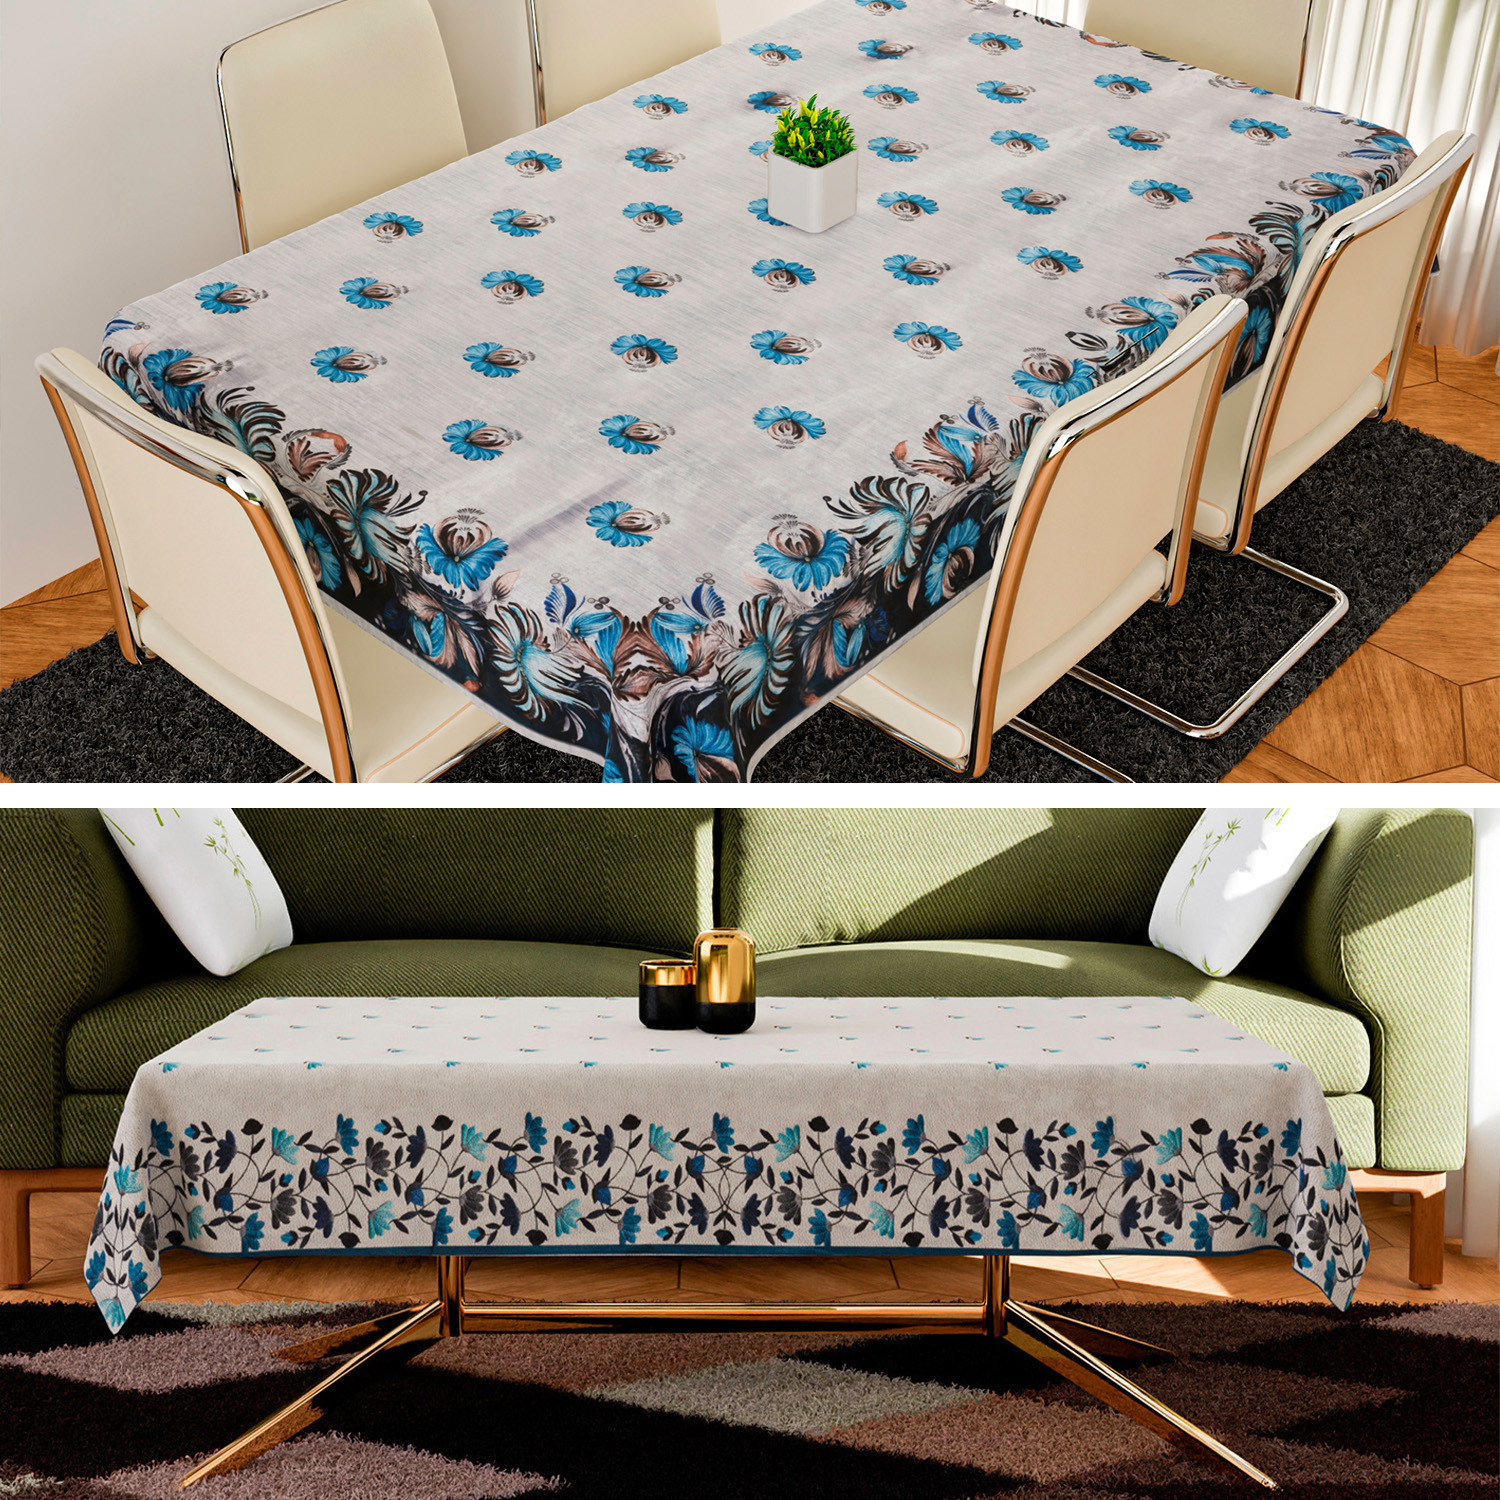 Kuber Industries Center & Dining Table Cover Set | Center & Dining Table Cover | Blue Digital Leaf Table Cover | Table Protector | Table Cover for Dining & Center | Gray